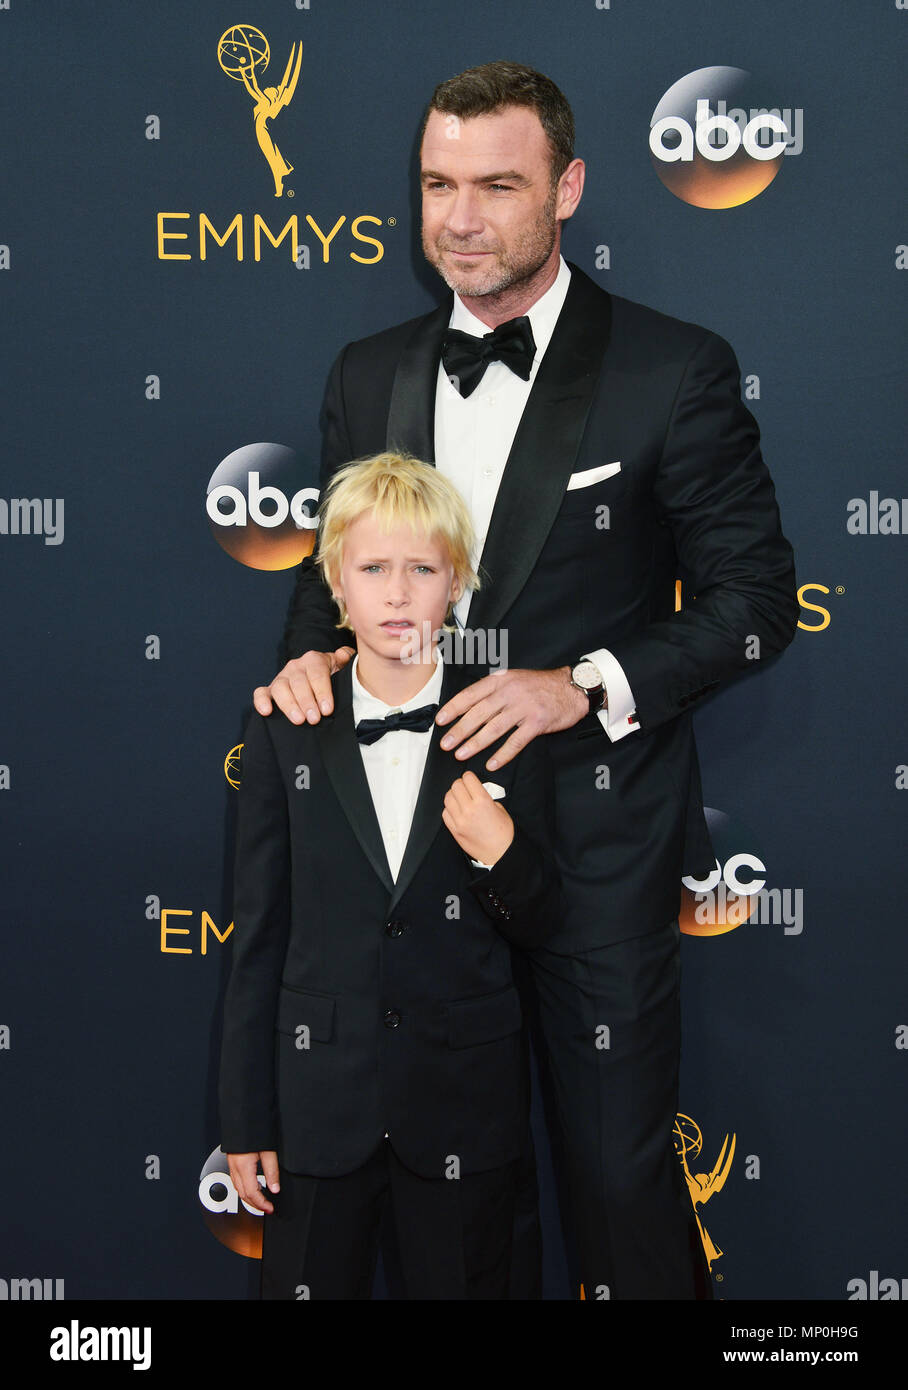 Liev Schreiber, Alexander Schreiber 070 at the 68th Emmy Awards 2016 at the Microsoft Theatre in Los Angeles. September 18, 2016.Liev Schreiber, Alexander Schreiber 070 ------------- Red Carpet Event, Vertical, USA, Film Industry, Celebrities,  Photography, Bestof, Arts Culture and Entertainment, Topix Celebrities fashion /  Vertical, Best of, Event in Hollywood Life - California,  Red Carpet and backstage, USA, Film Industry, Celebrities,  movie celebrities, TV celebrities, Music celebrities, Photography, Bestof, Arts Culture and Entertainment,  Topix, vertical,  family from from the year , 2 Stock Photo